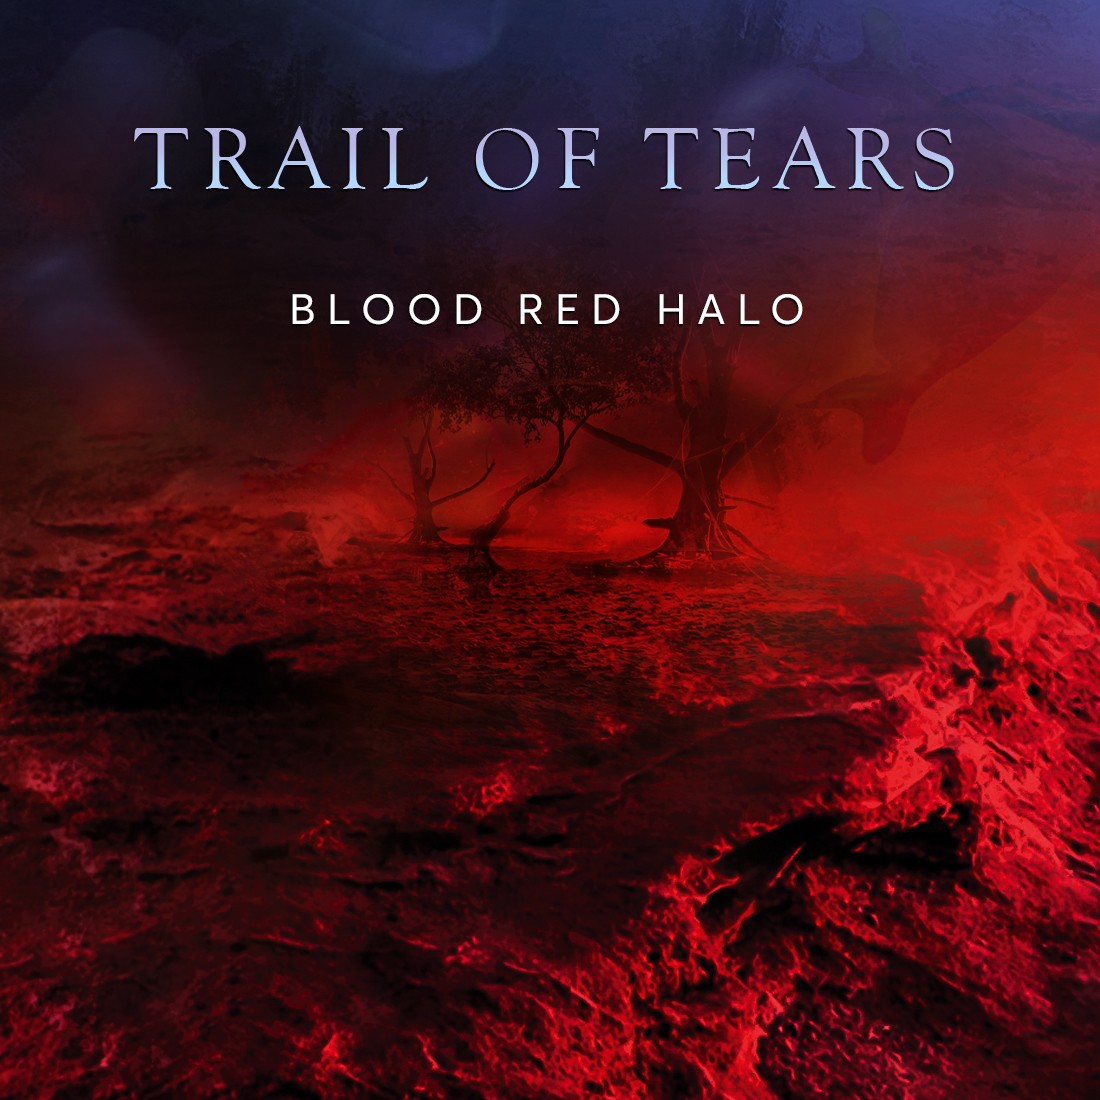 Trail of Tears – Blood Red Halo – Second single & video from the upcoming EP “Winds of Disdain” out now!